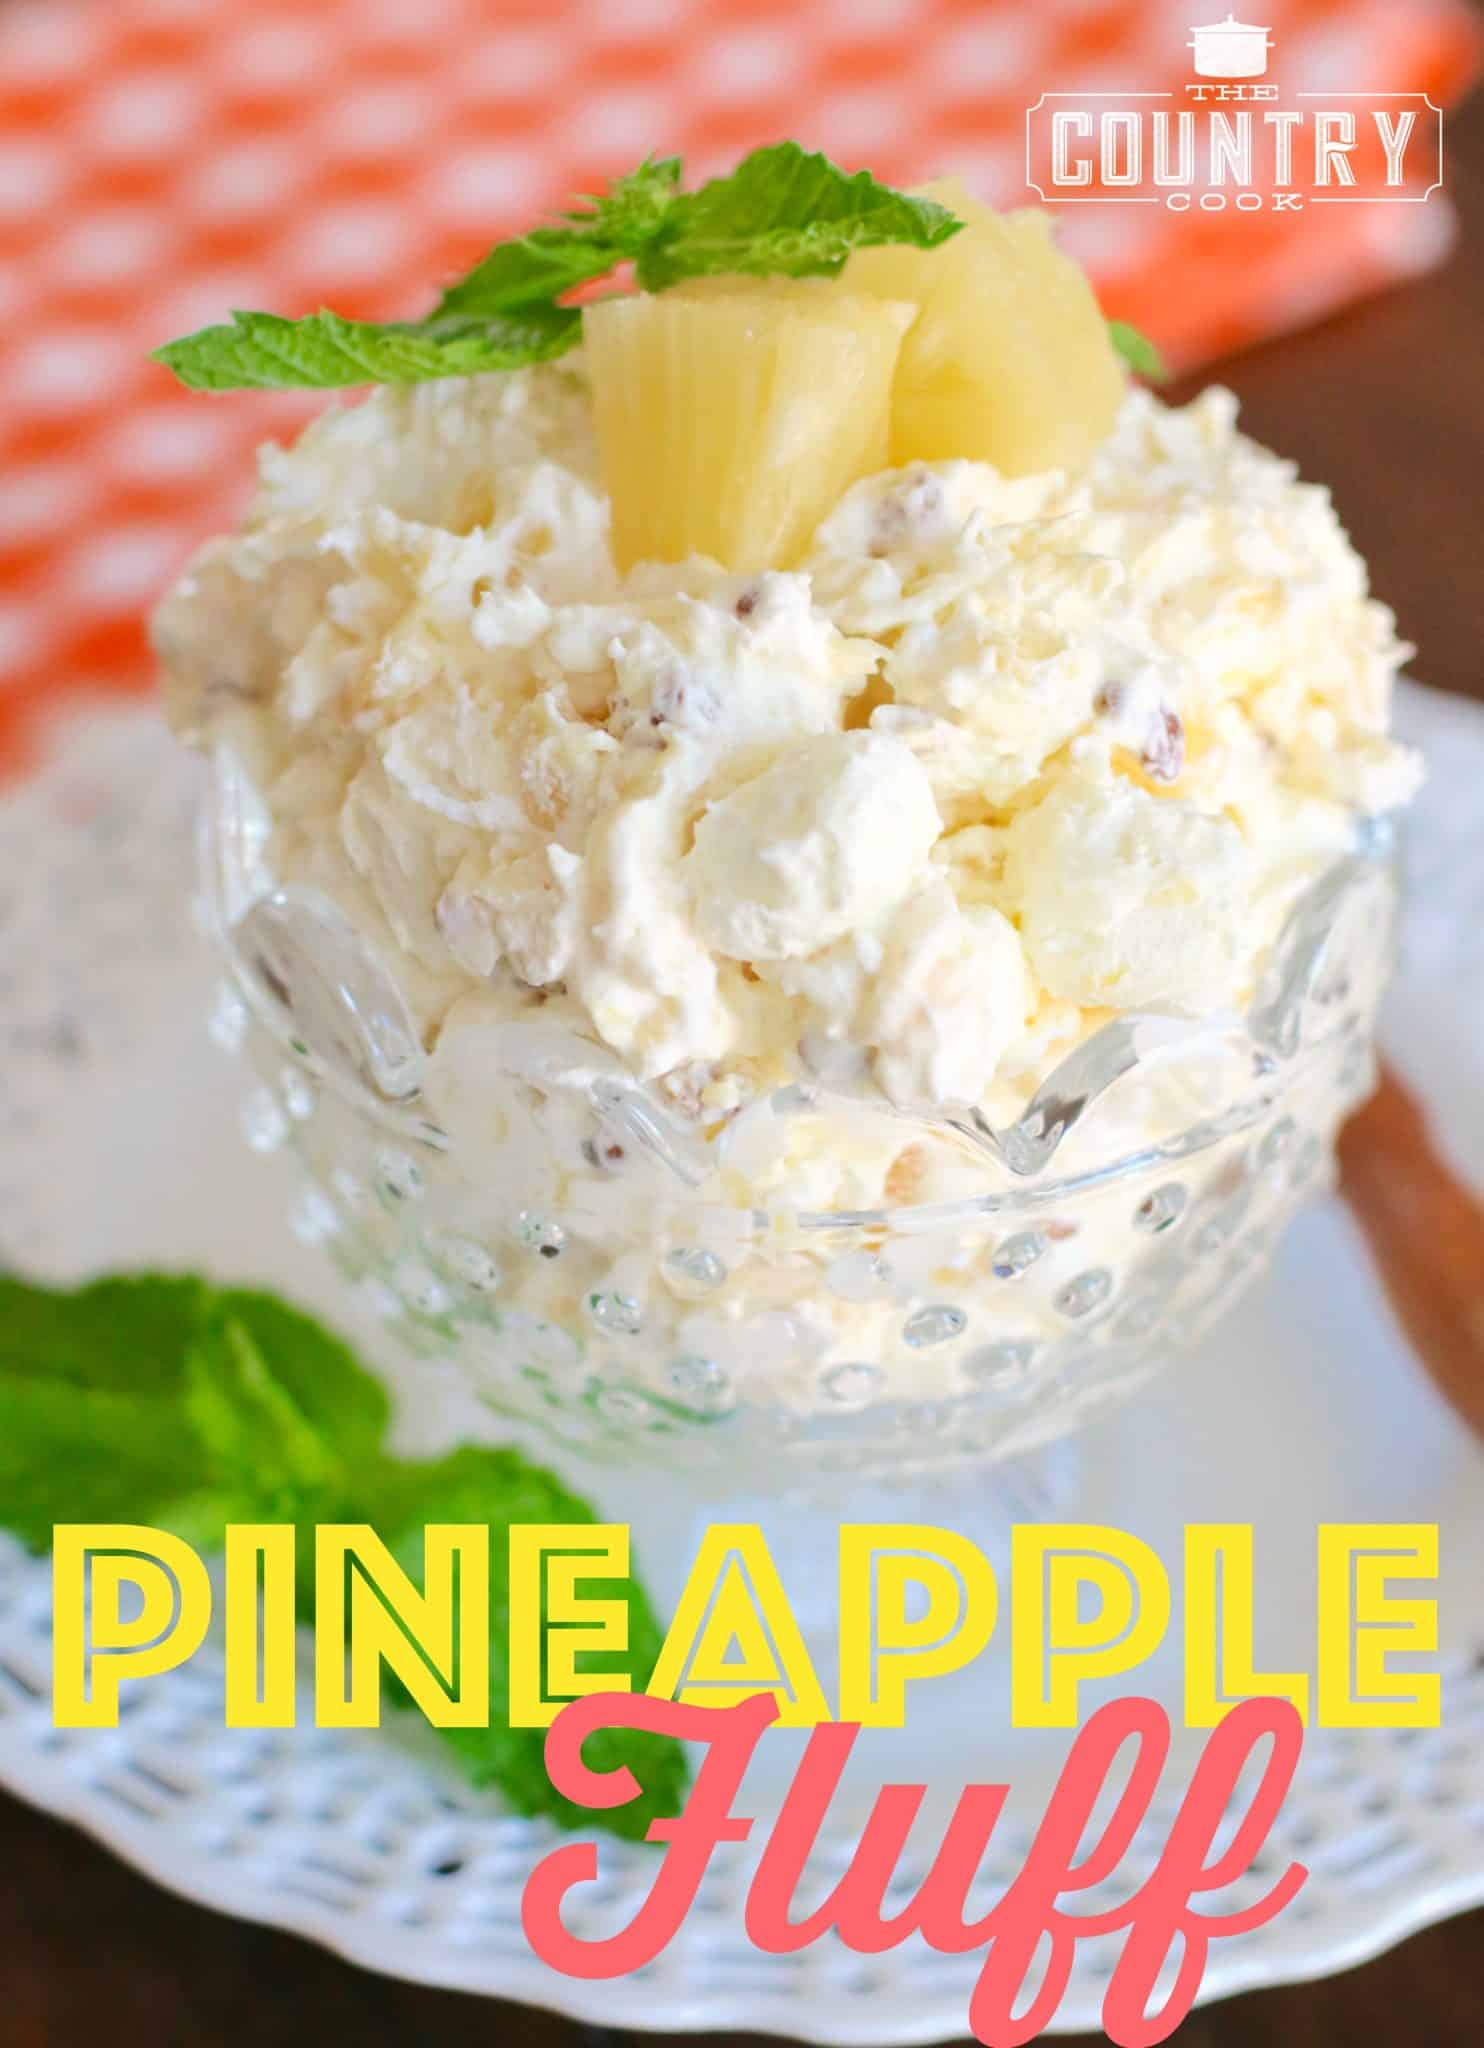 Pineapple Fluff shown in a clear, hobnail, dessert dish and topped with two chunks of pineapple.